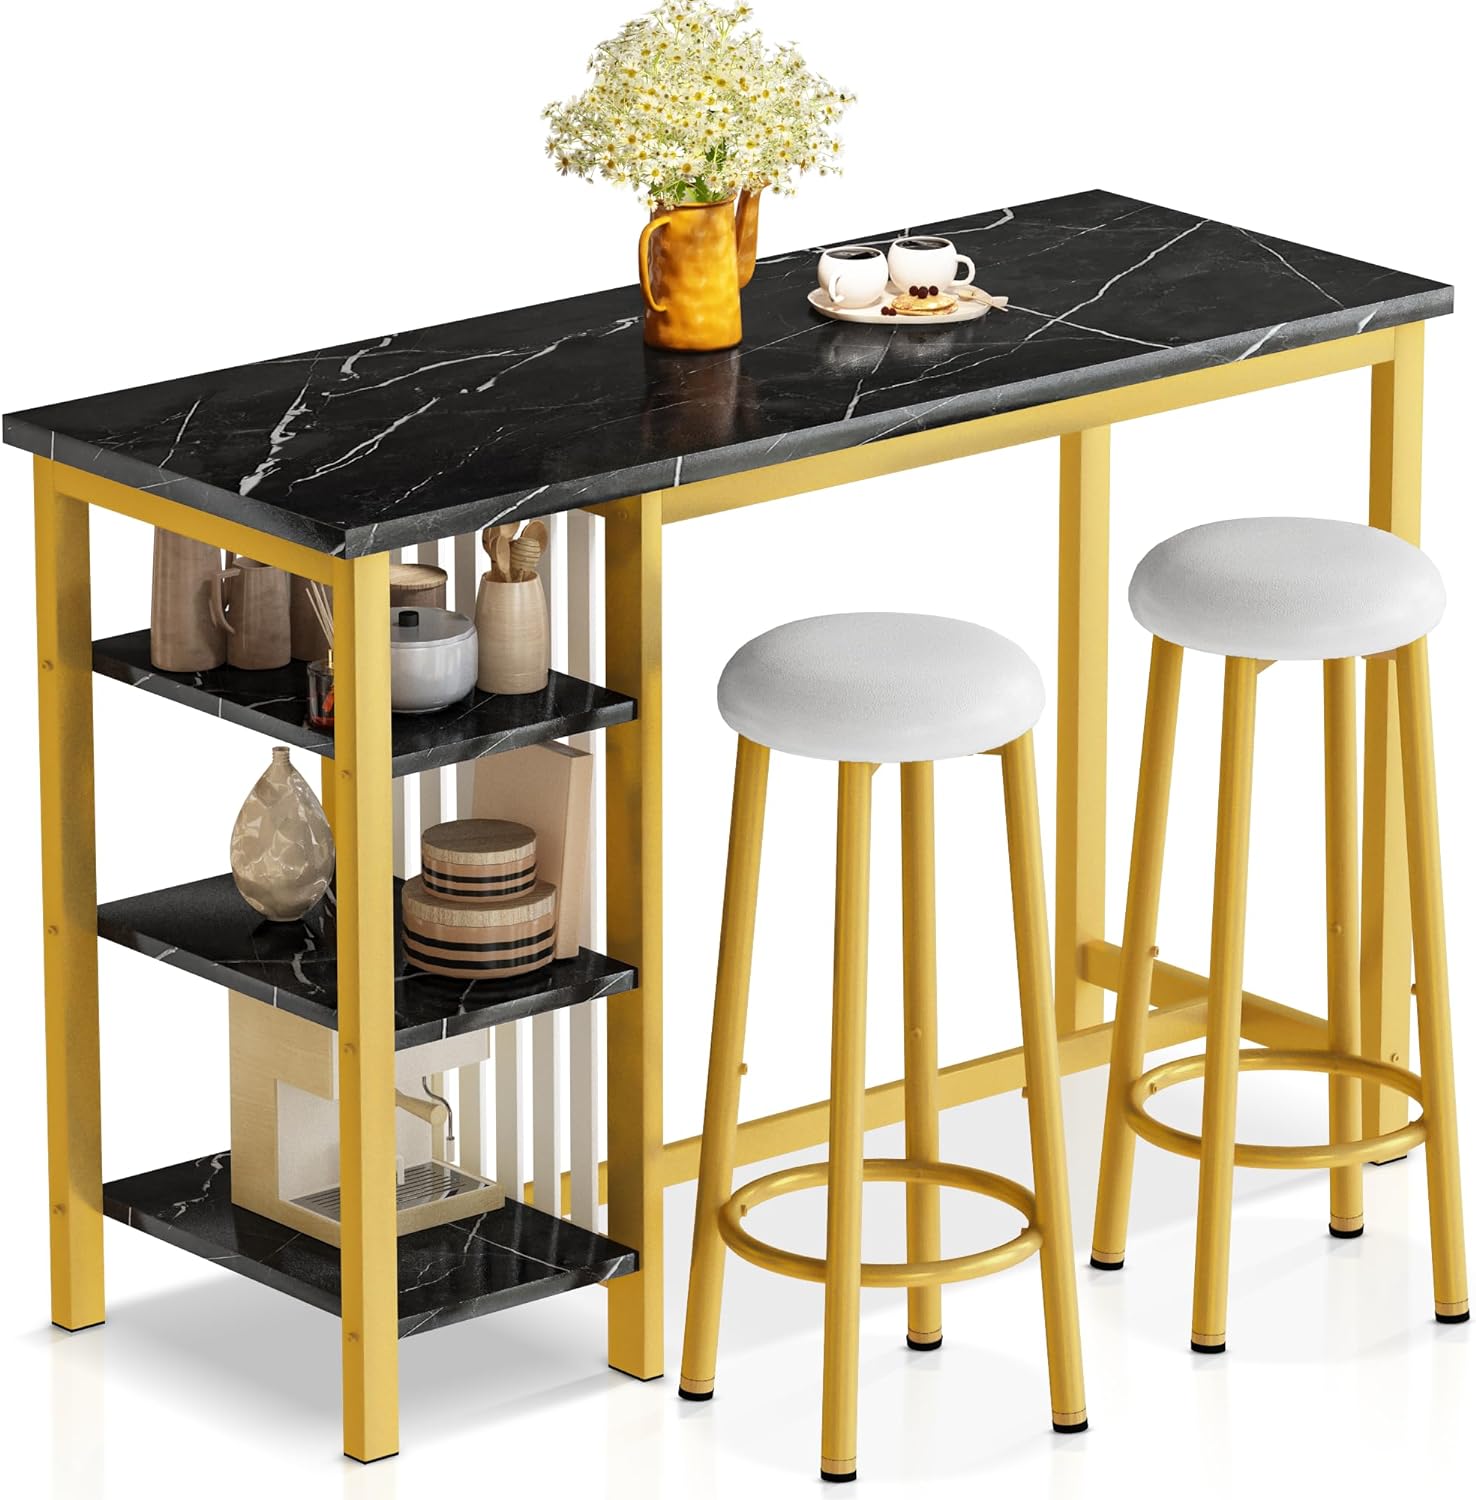 AWQM Bar Table and Chairs Set with 3 Storage Shelves, Faux Marble Dining Table for 2 with PU Upholstered Chairs, Bar Height Table and Chairs for Small Space,Breakfast Nook(Black GoldWhite)